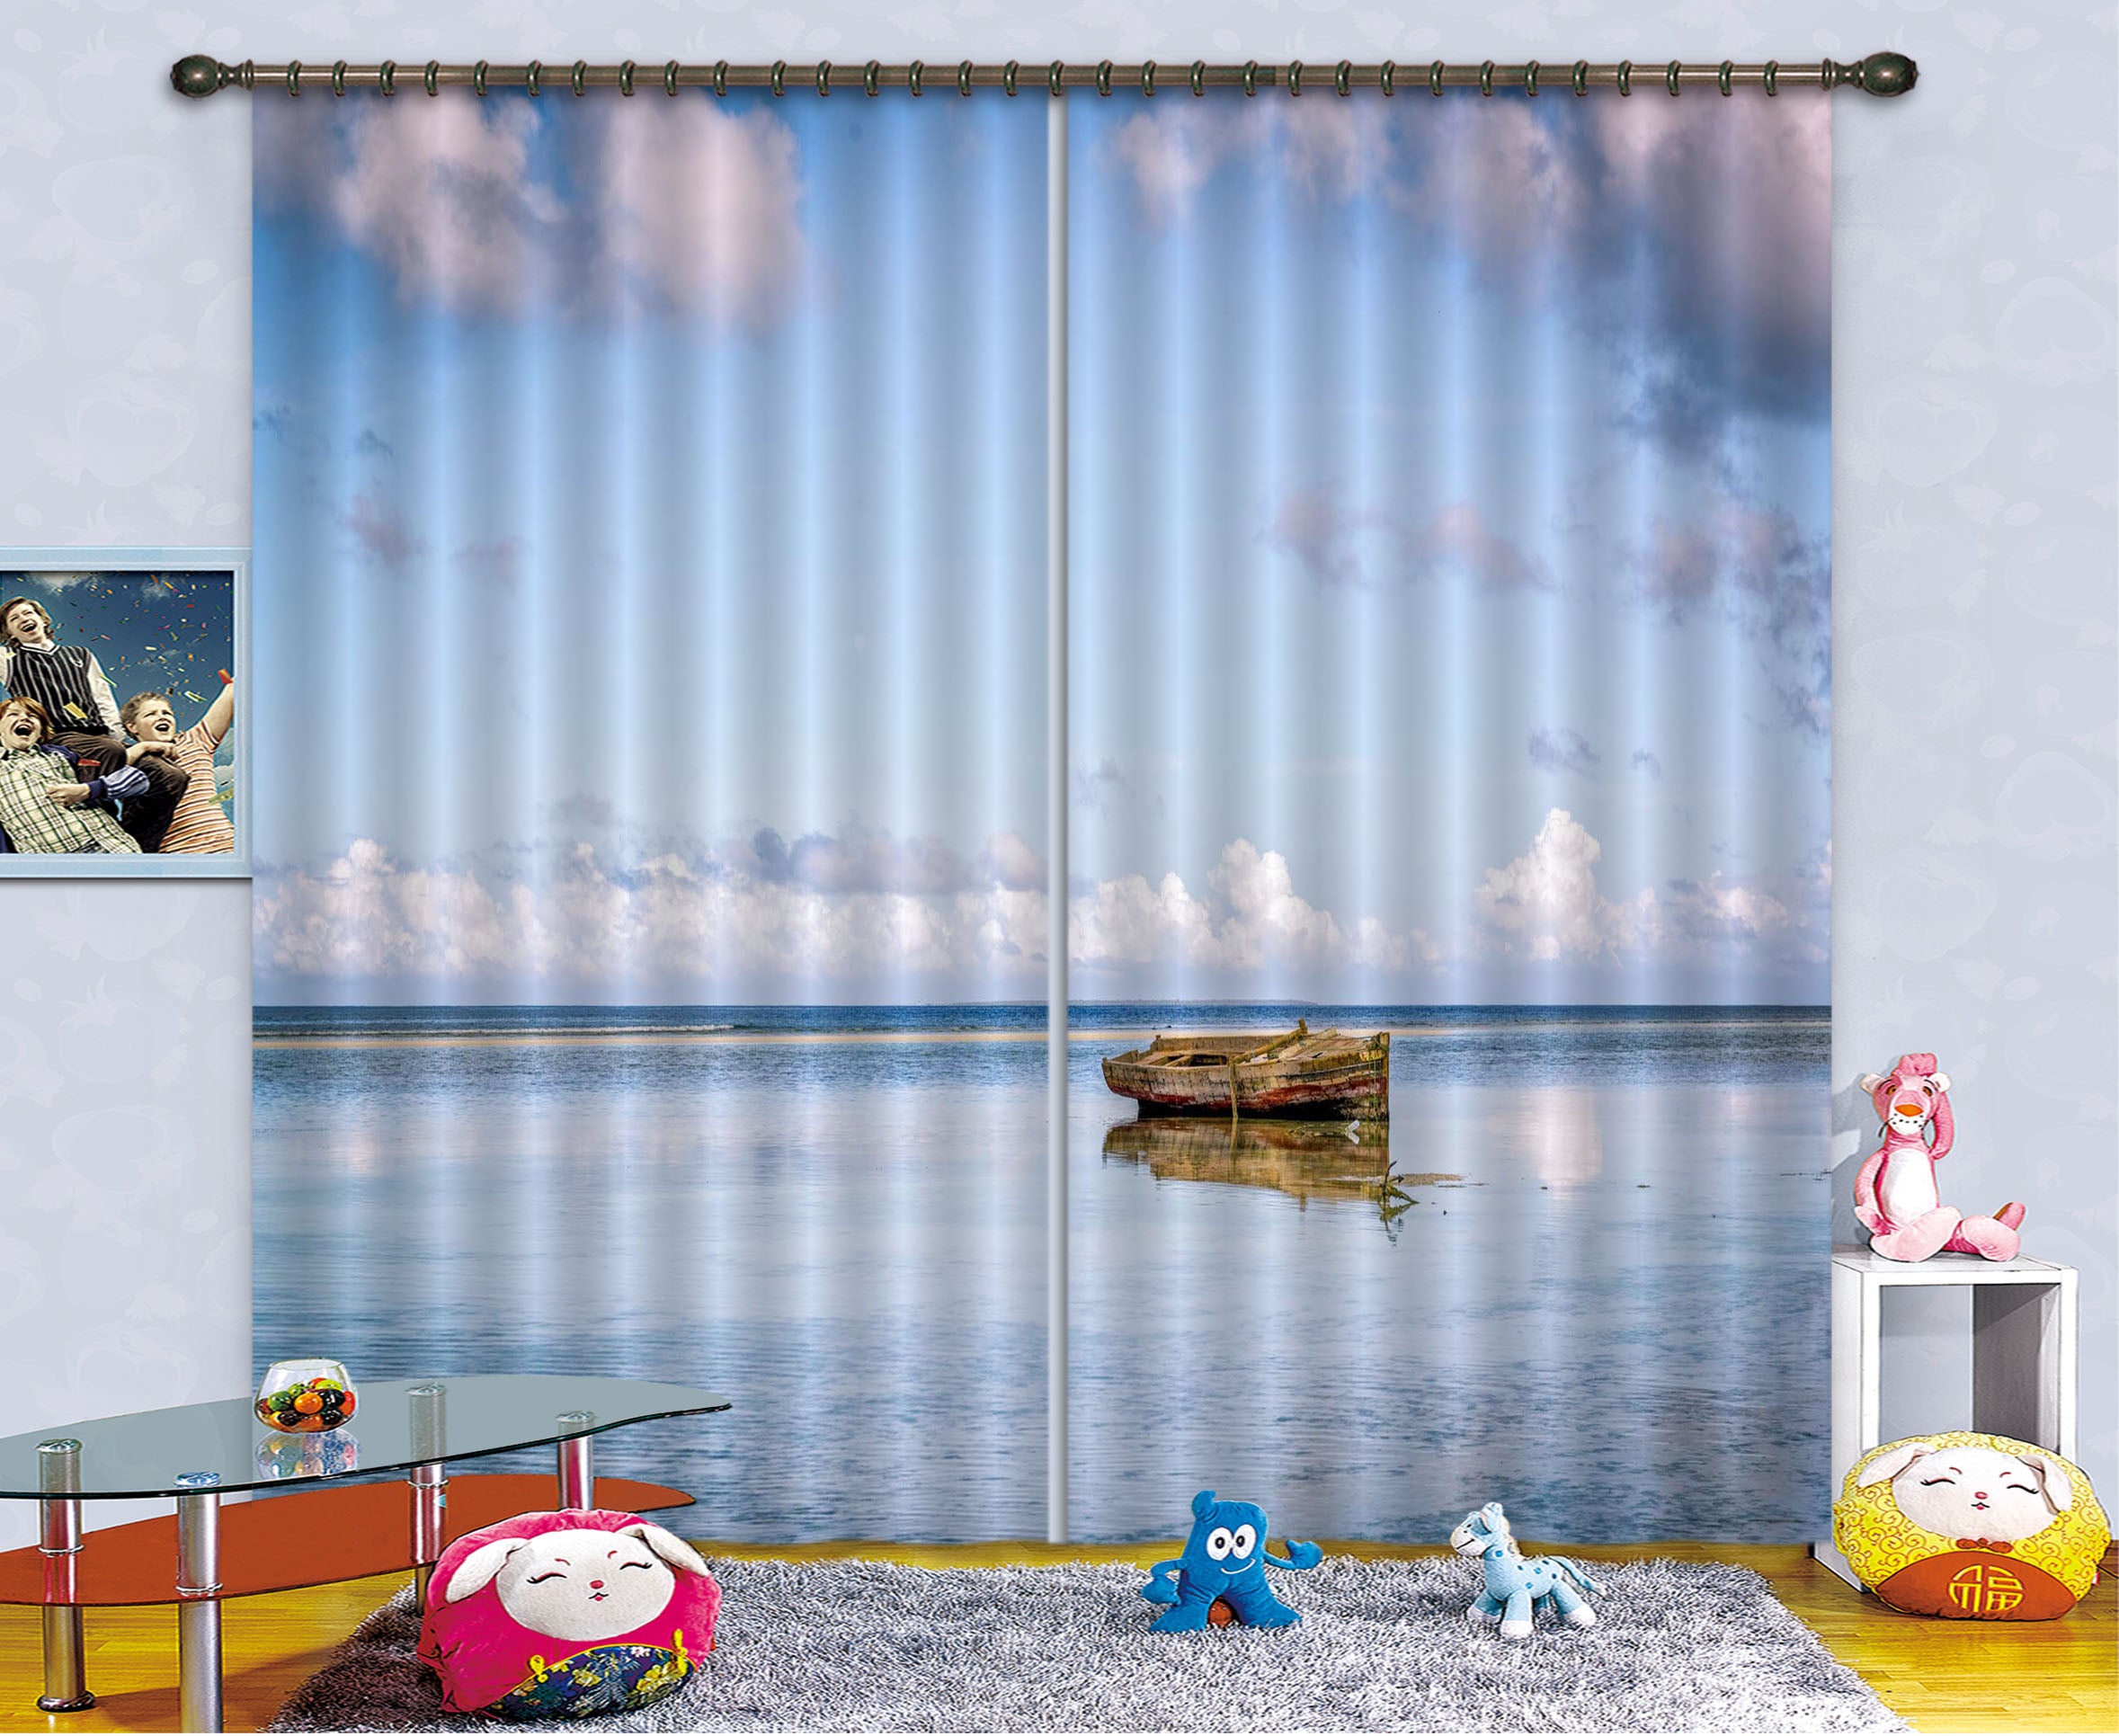 3D Crystal Clear Water 111 Marco Carmassi Curtain Curtains Drapes